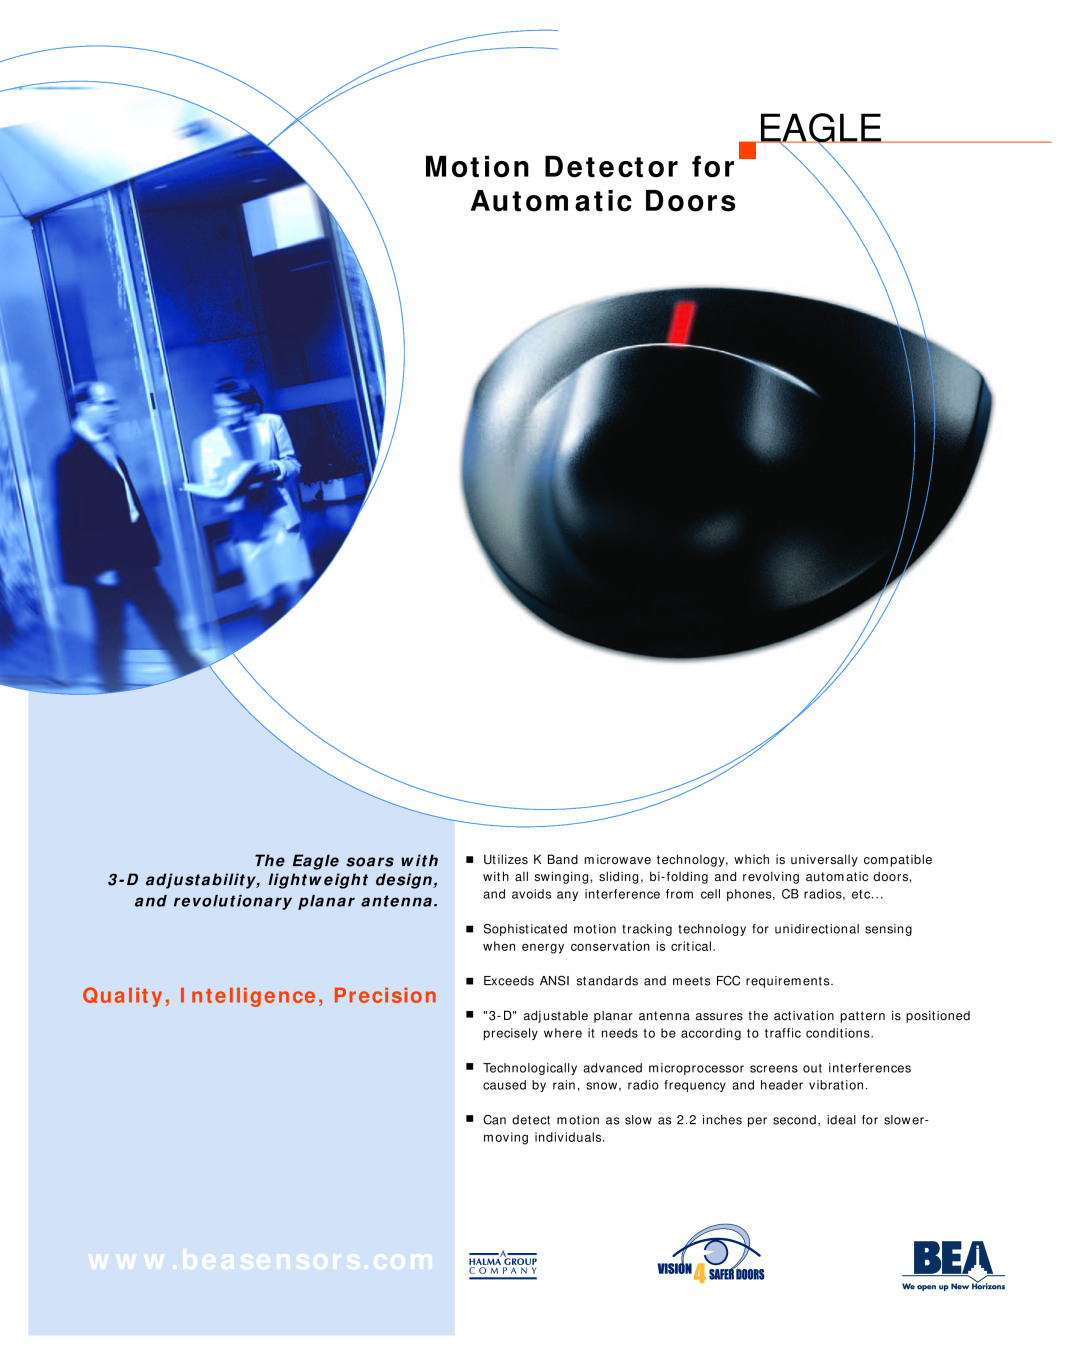 BEA Eagle manual Motion Detector for Automatic Doors, Quality, Intelligence, Precision, and revolutionary planar antenna 